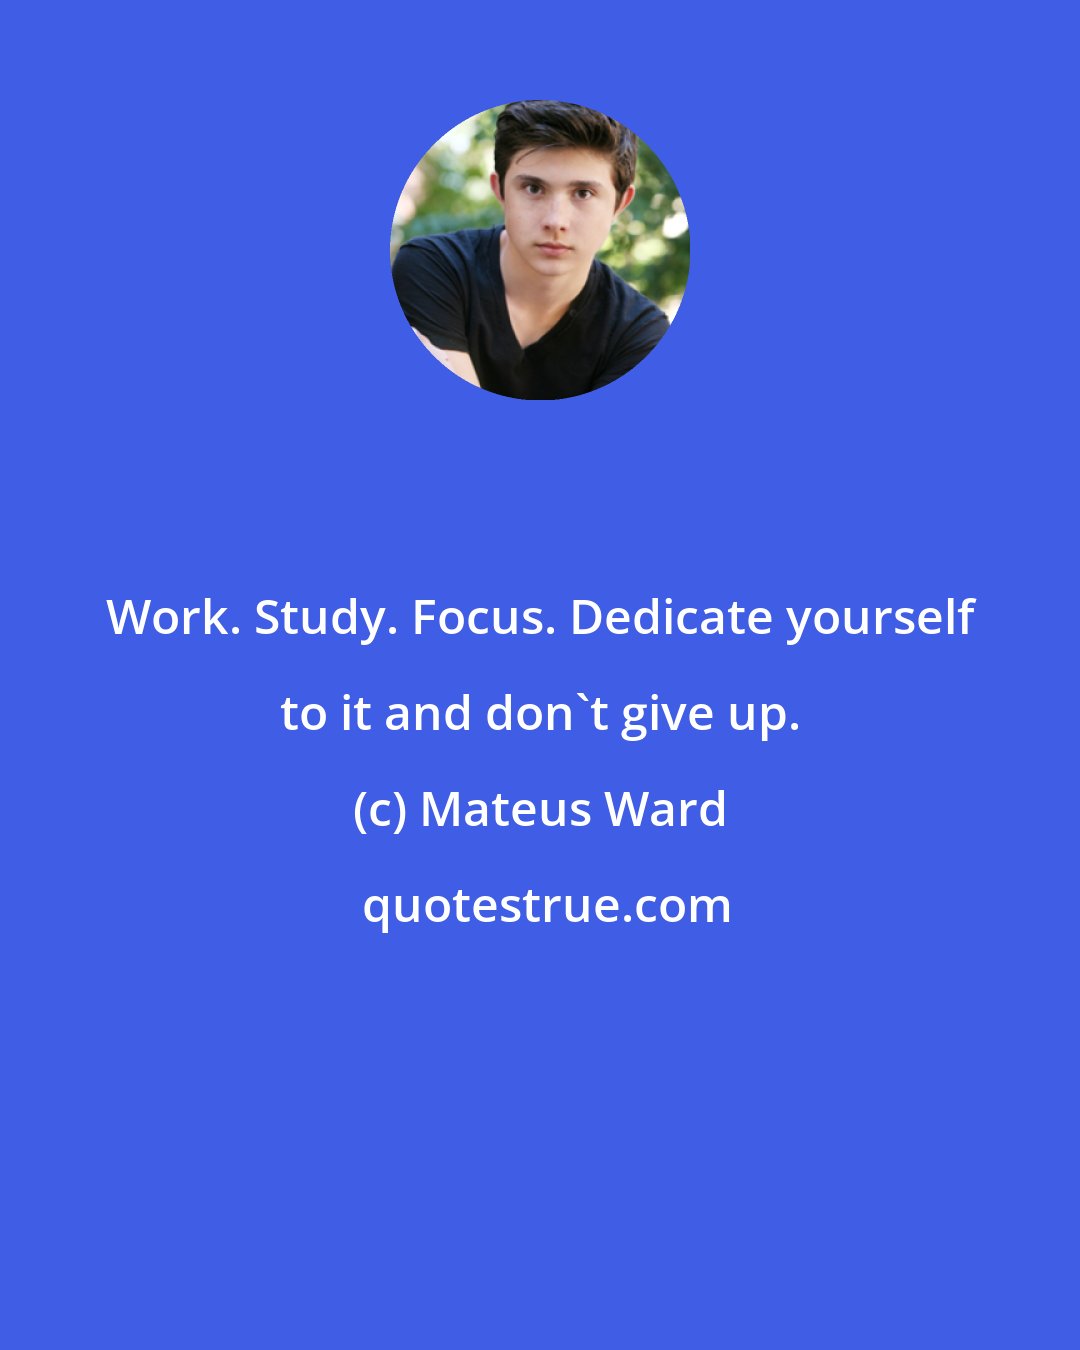 Mateus Ward: Work. Study. Focus. Dedicate yourself to it and don't give up.